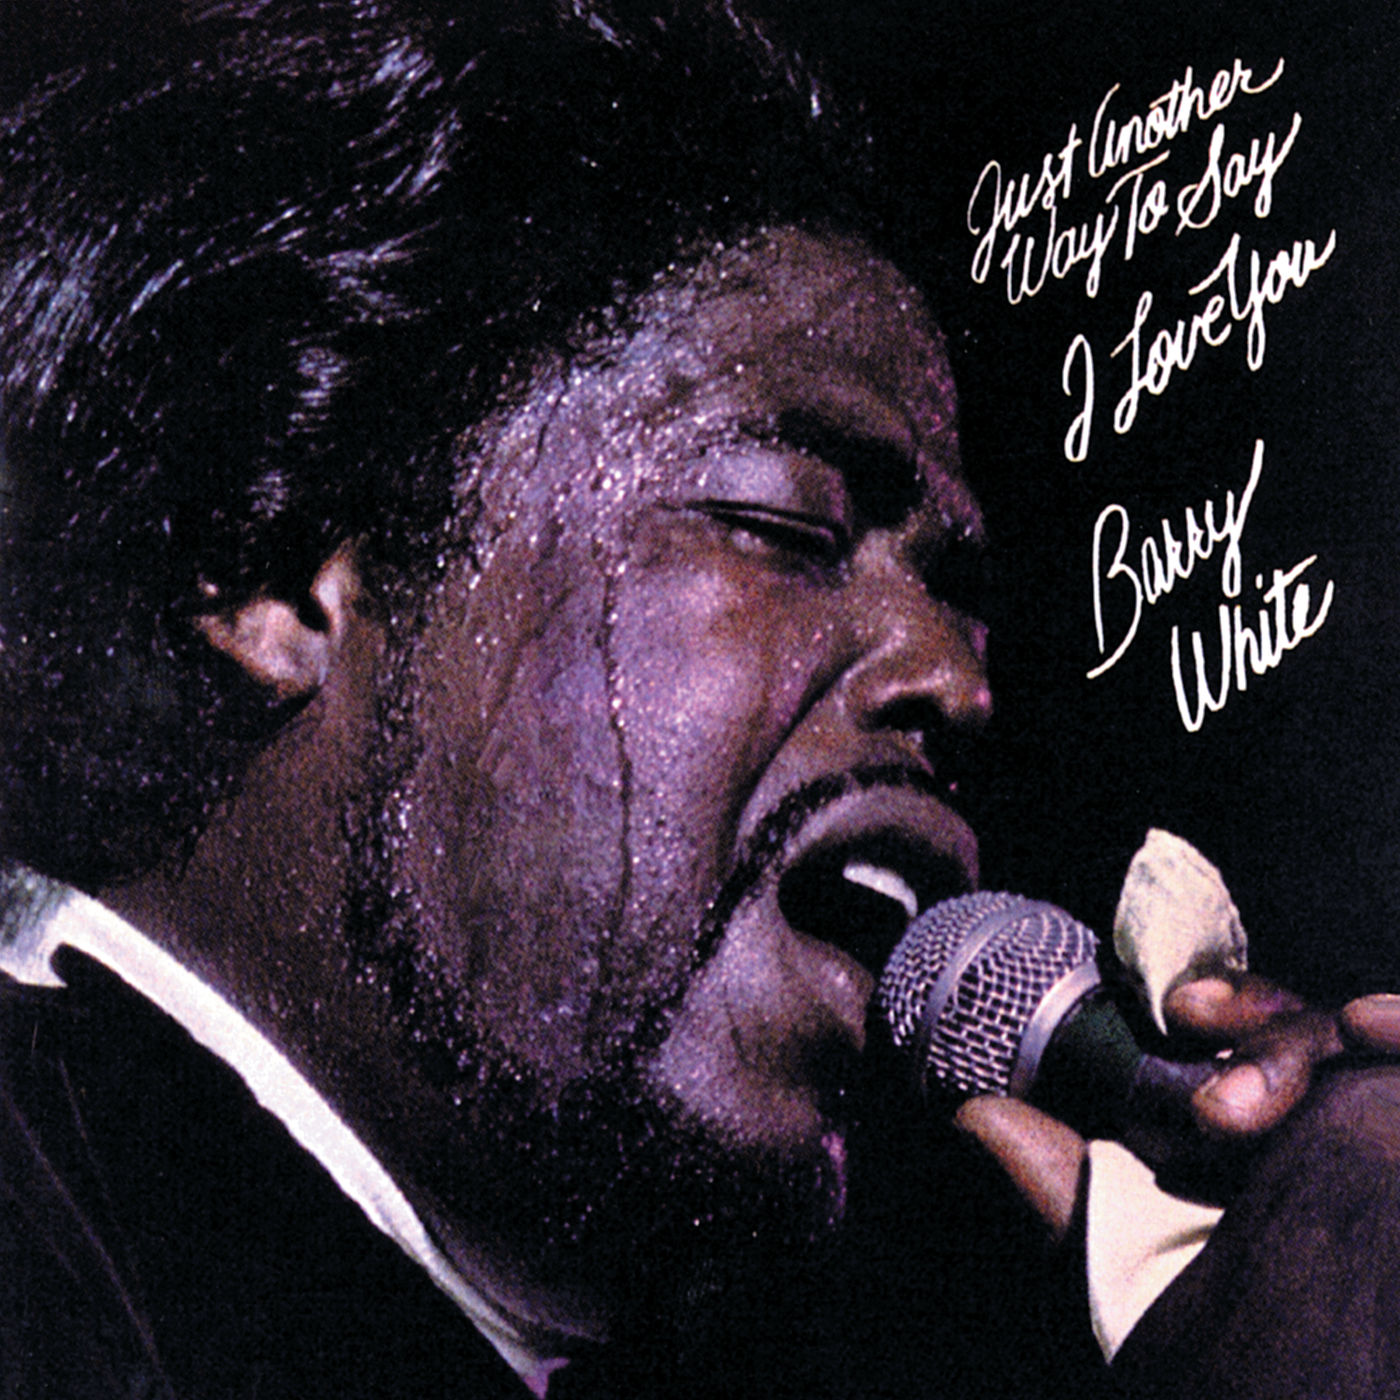 Barry White - Just Another Way To Say I Love You (1975/2021) [FLAC 24bit/192kHz]